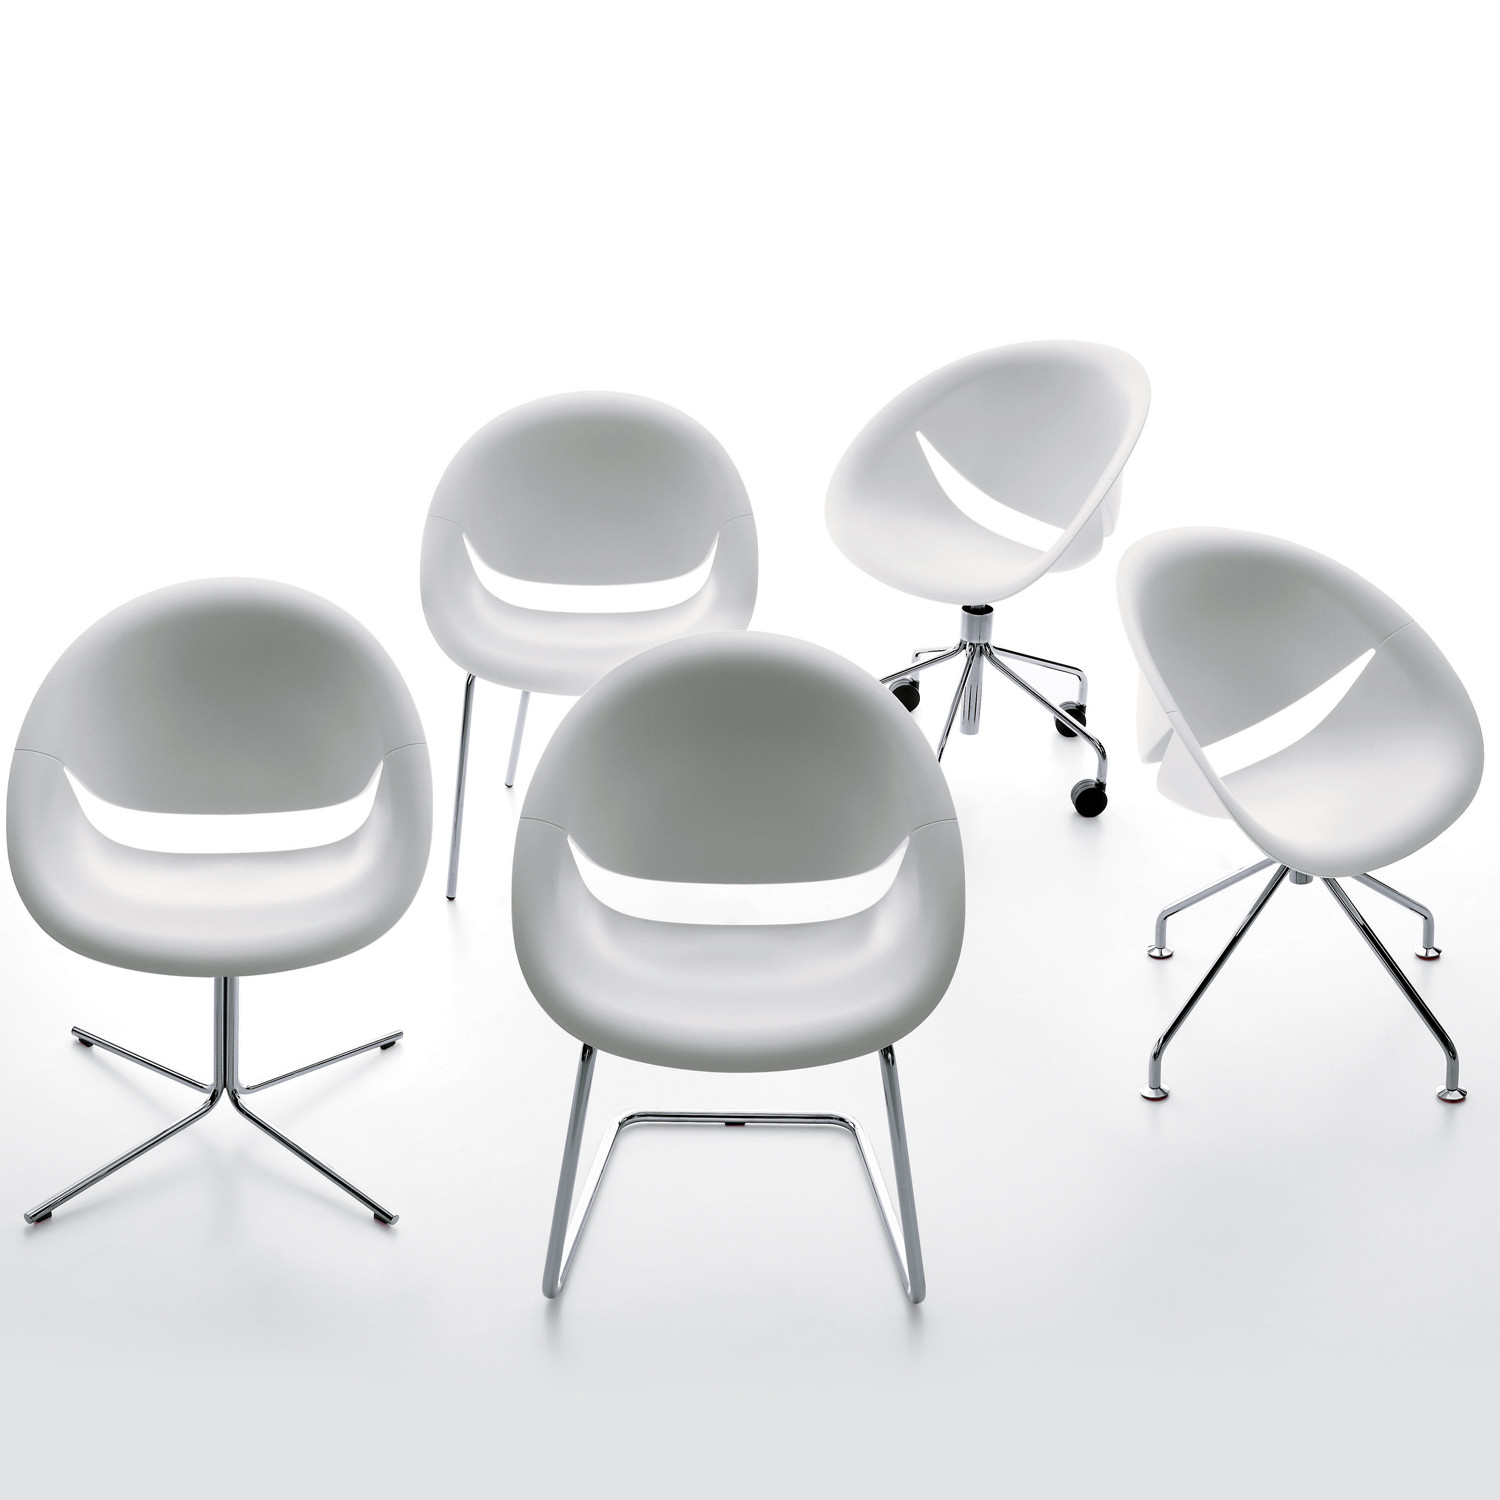 So Happy Chairs - Base Options